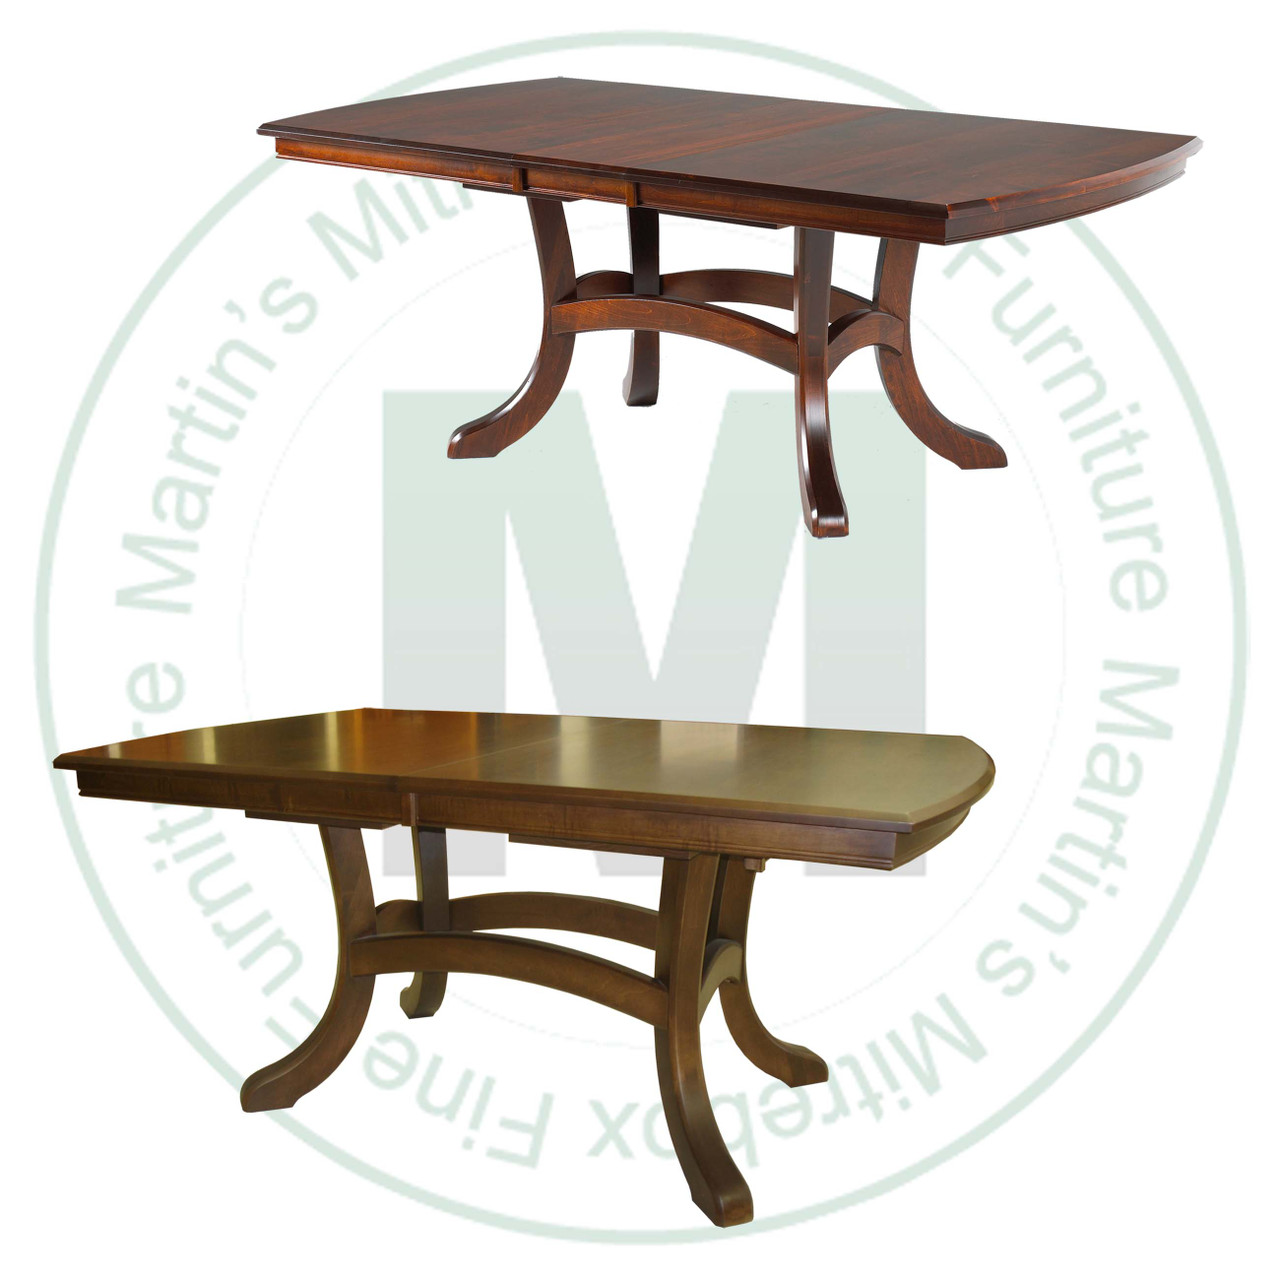 Oak Jordan Double Pedestal Table 42''D x 96''W x 30''H With 3 - 12'' Leaves. Table Has 1.25'' Thick Top